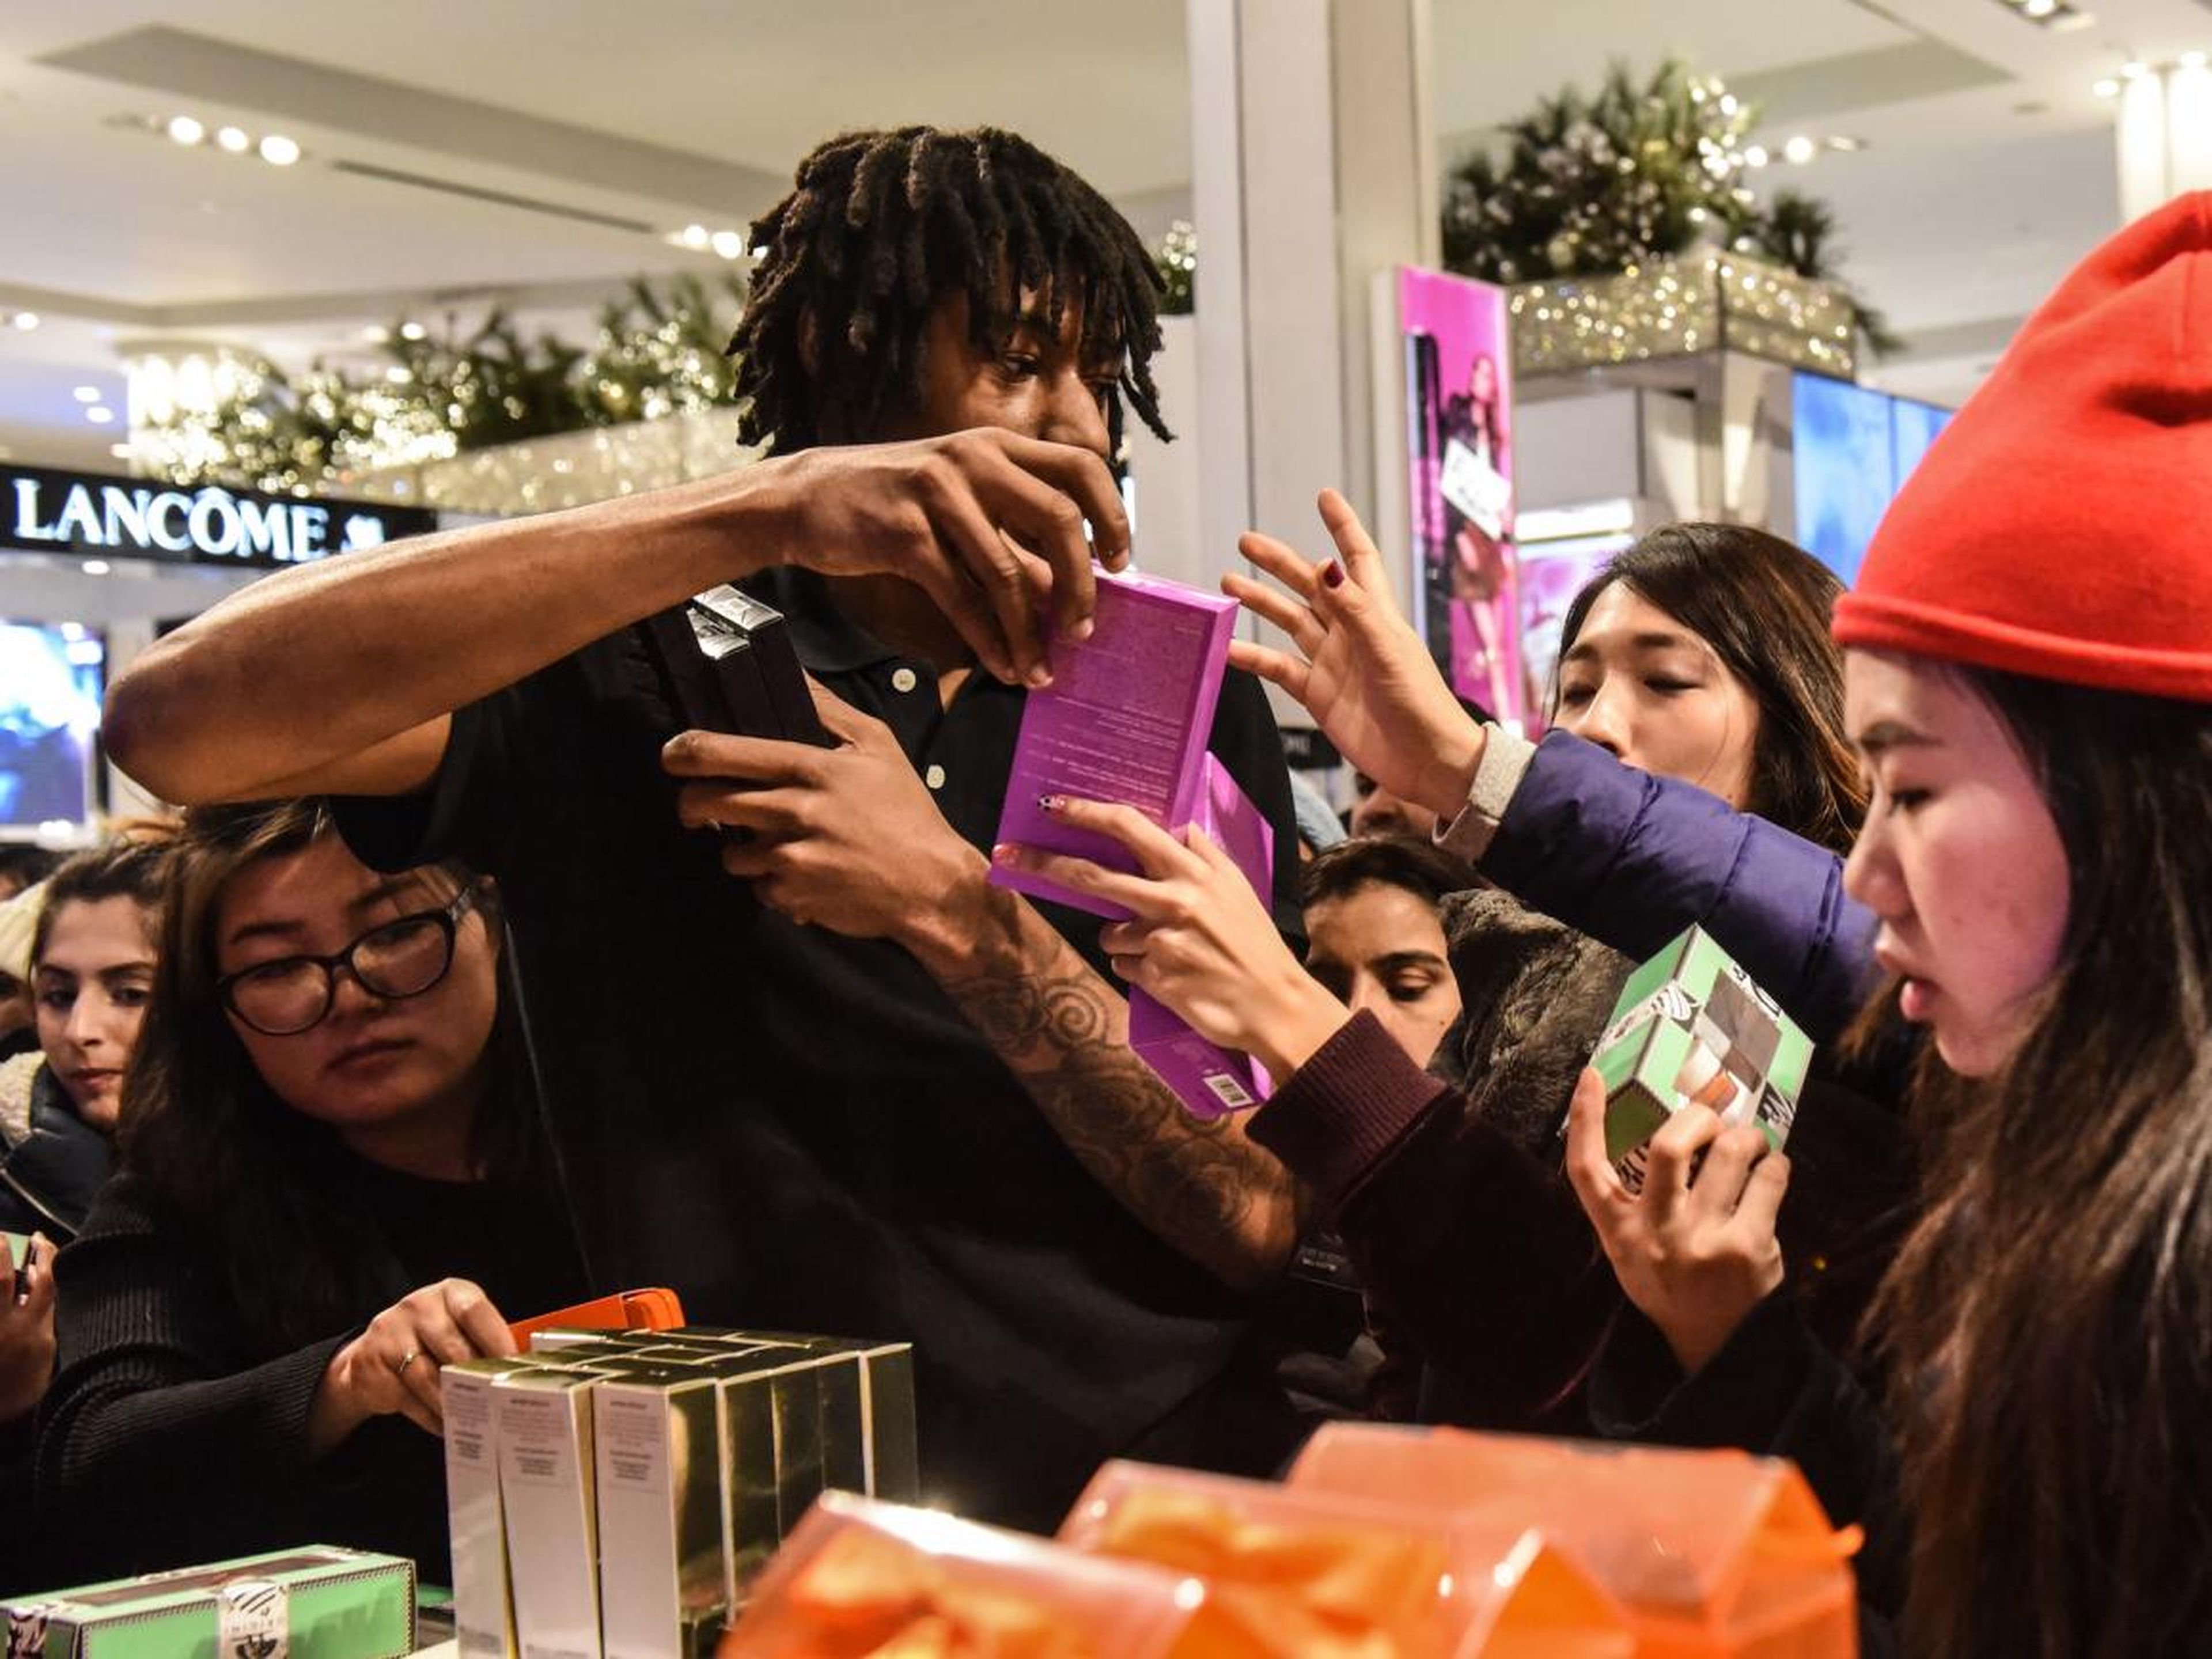 Black Friday is one of the biggest — and wildest — shopping days of the year in the US.